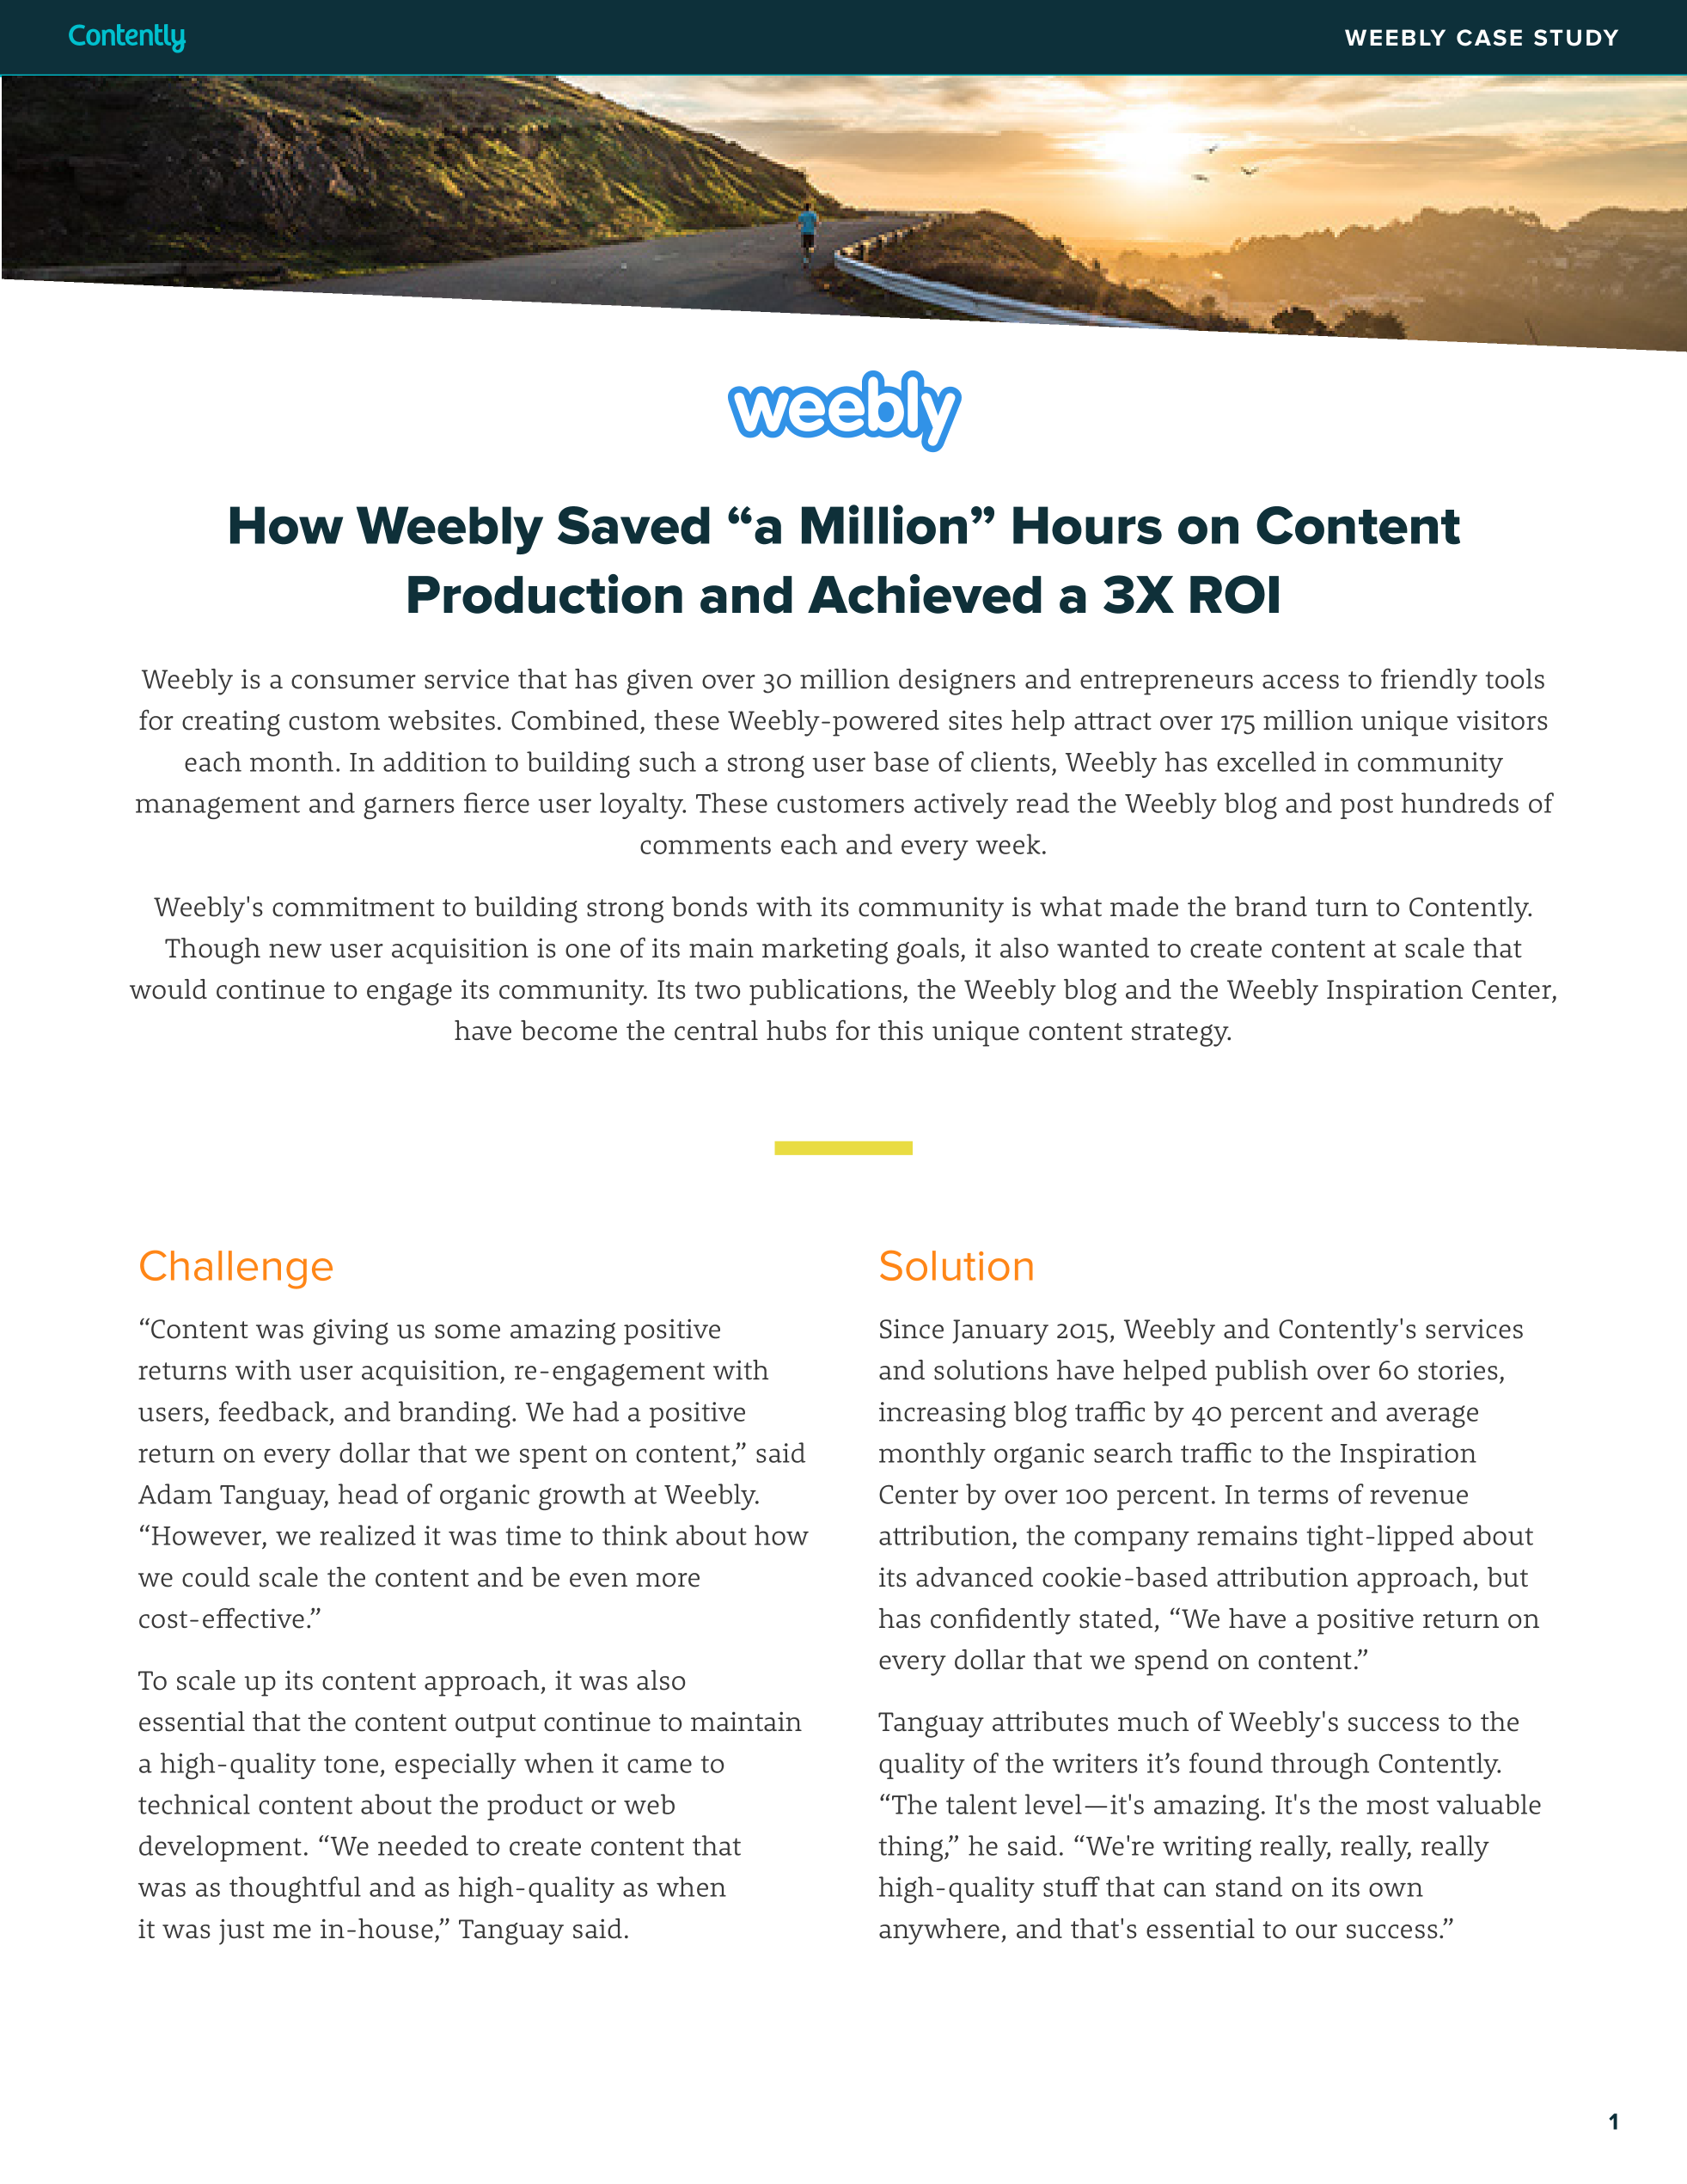 How to Create and Write a Case Study (+20 Great Examples)